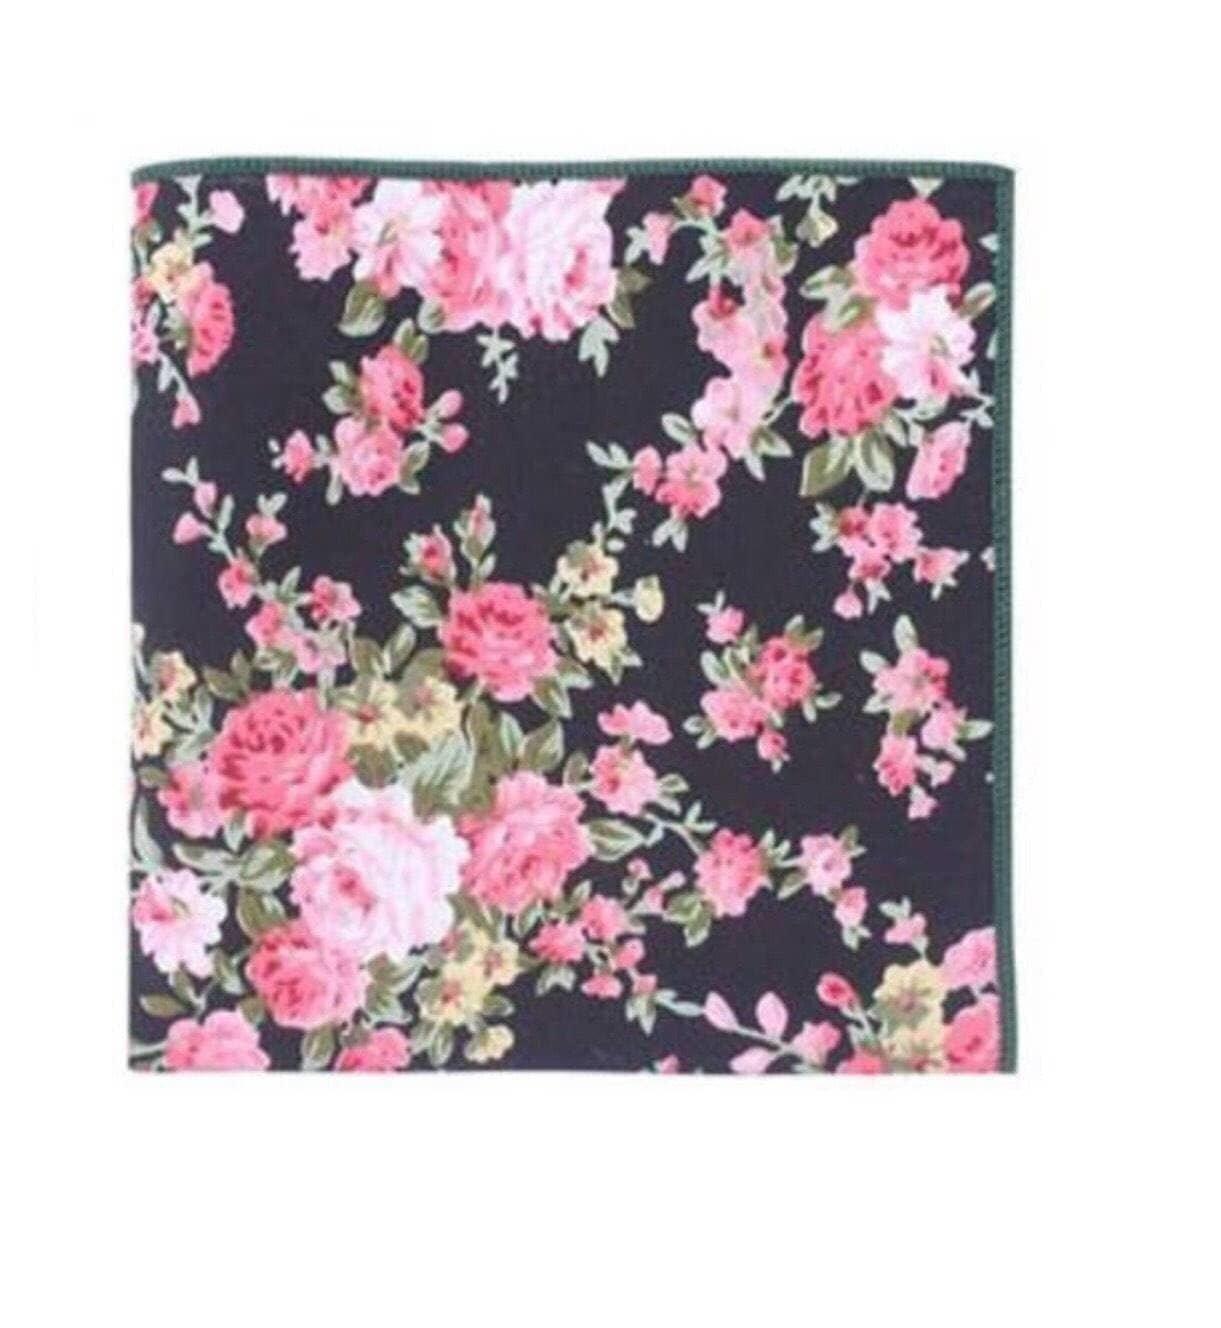 JOE Floral Pocket Square Mytieshop JOE Floral Pocket Square Class up your suit with this dapper floral pocket square. Printed with a tasteful floral design, this pocket square is perfect for dressing up your suit. It&#39;ll add some personality and style to your look, and it&#39;s a great way to show some personality. Made from high-quality materials, this pocket square is a must-have for any modern man.